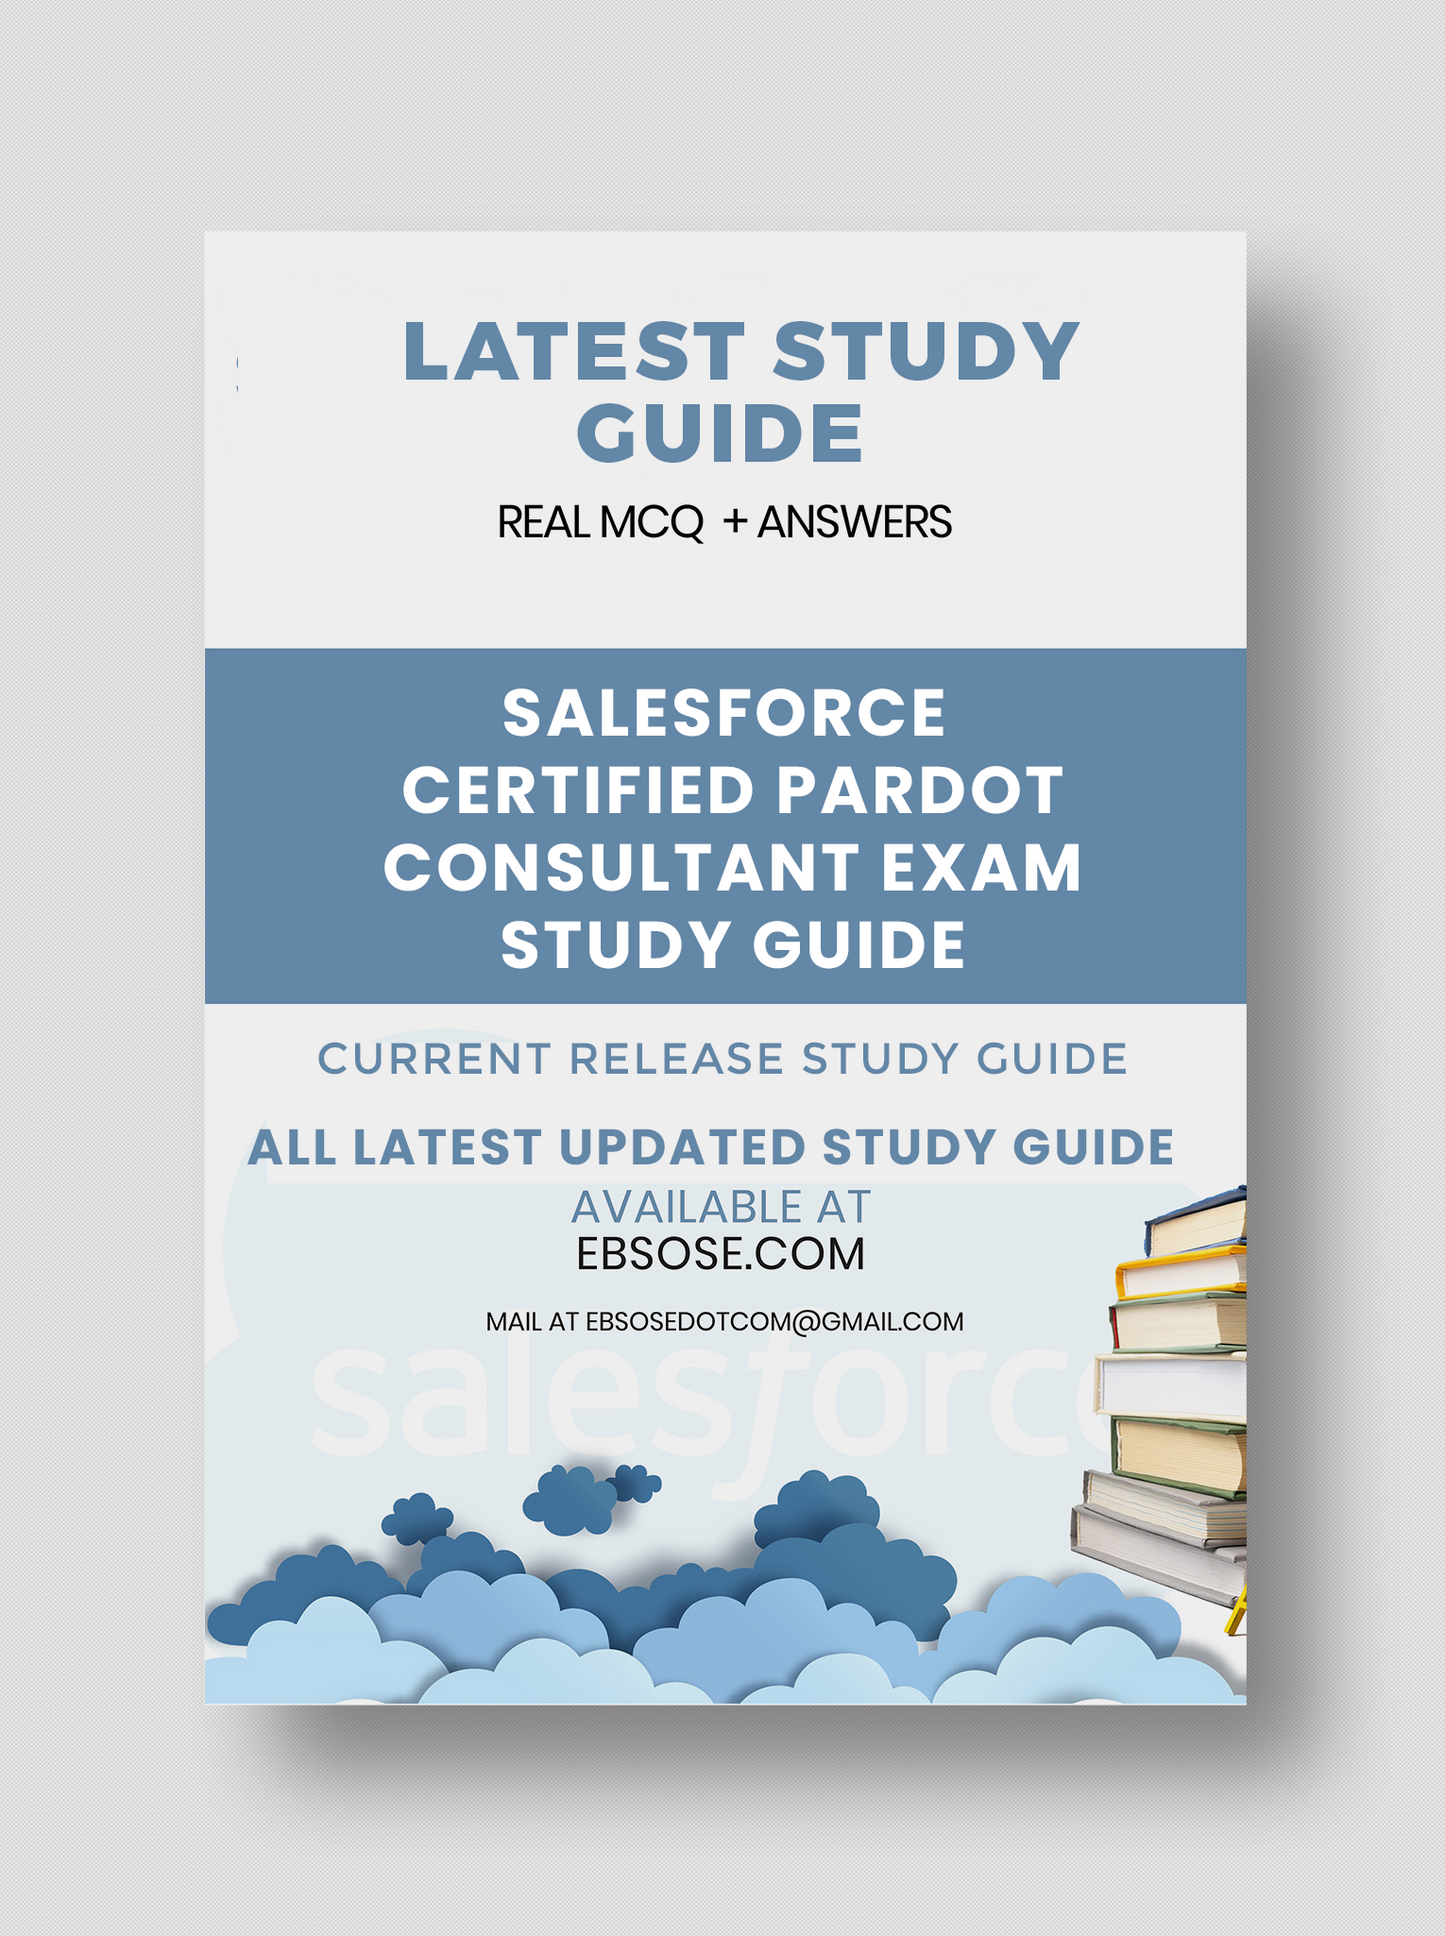 Salesforce Certified Pardot Consultant Exam Study Guide - Winter 24 Study Guide